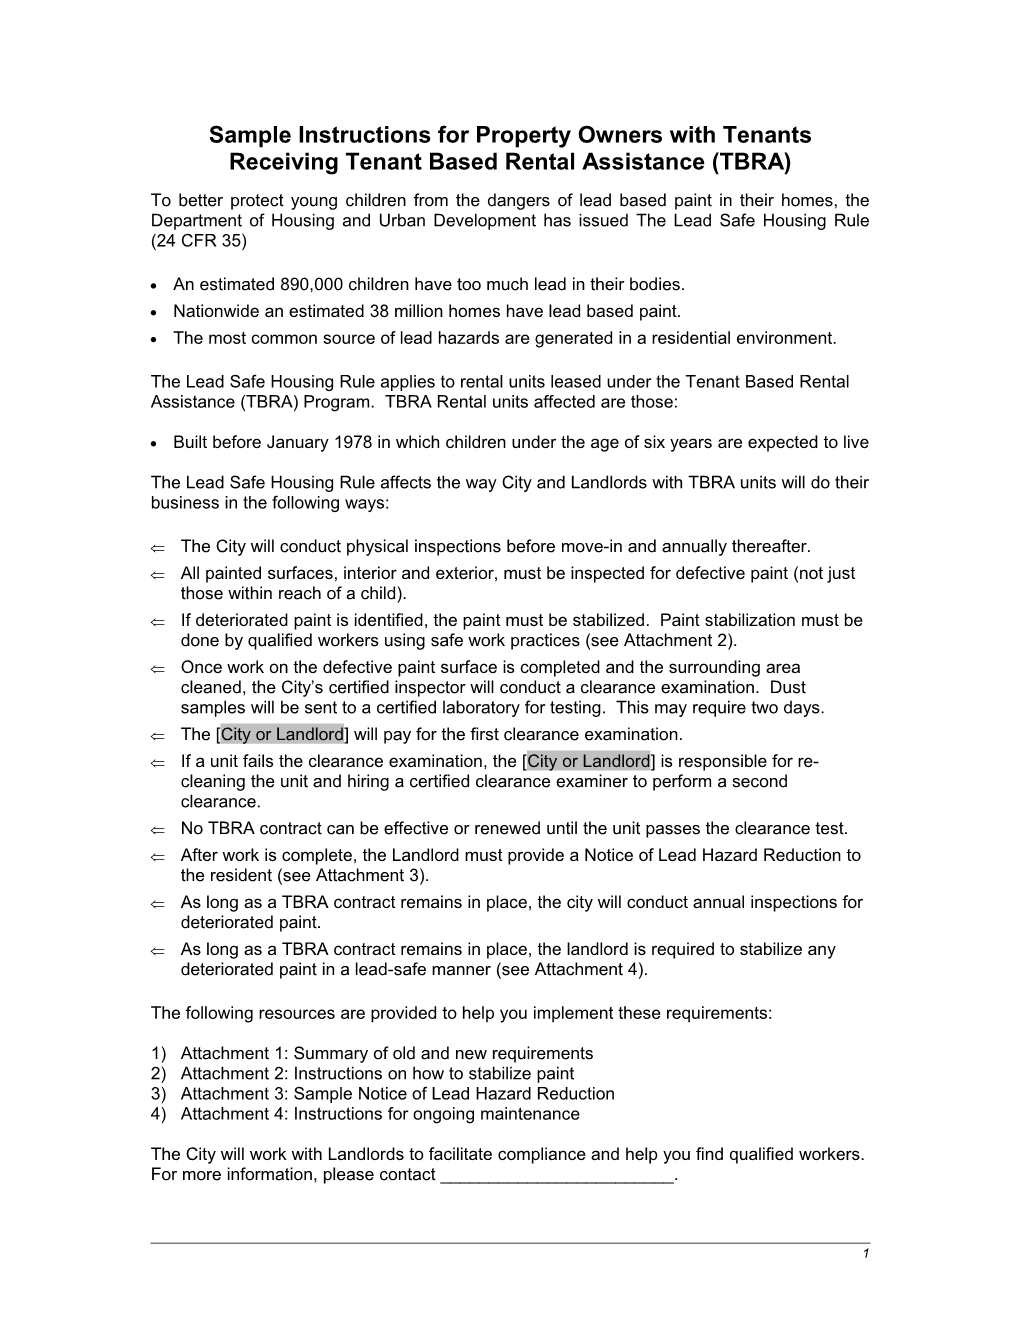 Sample Instructions for Property Owners with Tenants Receiving Tenant Based Rental Assistance